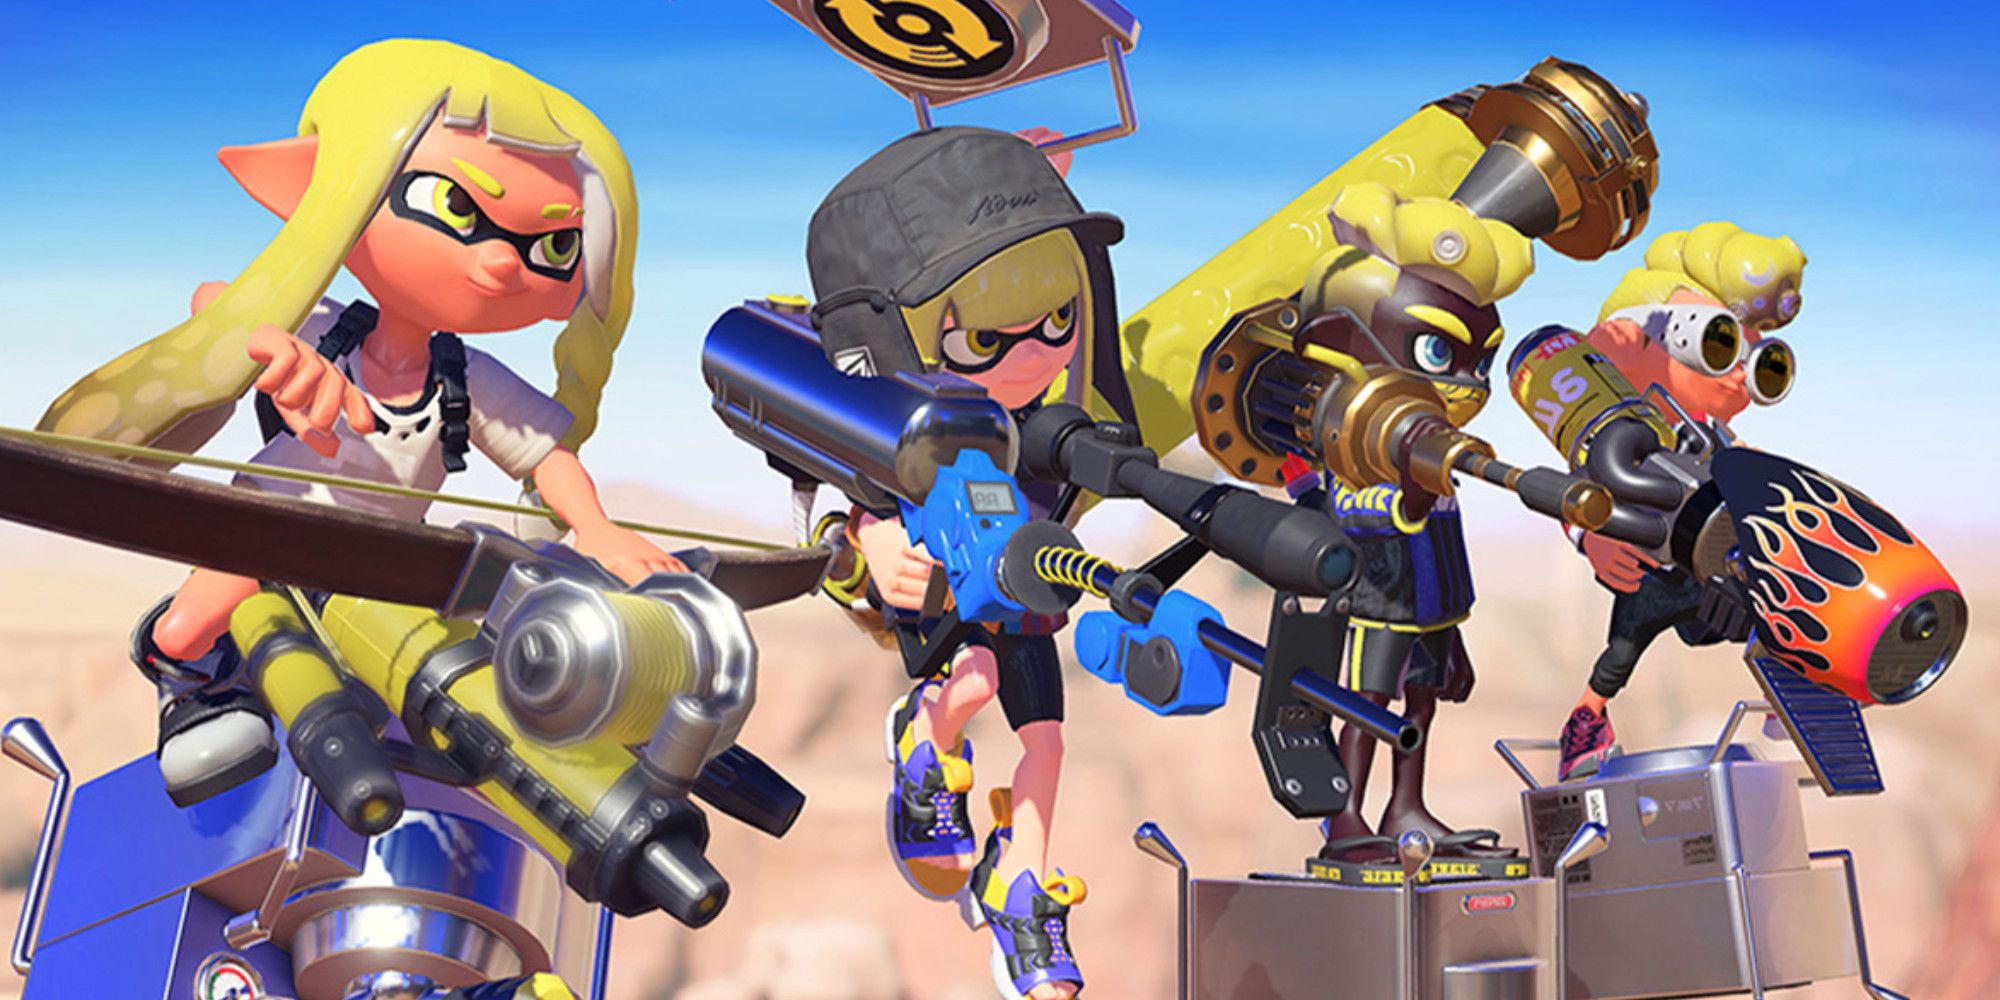 Four Inklings with various weapons floating in the air waiting to drop into a game